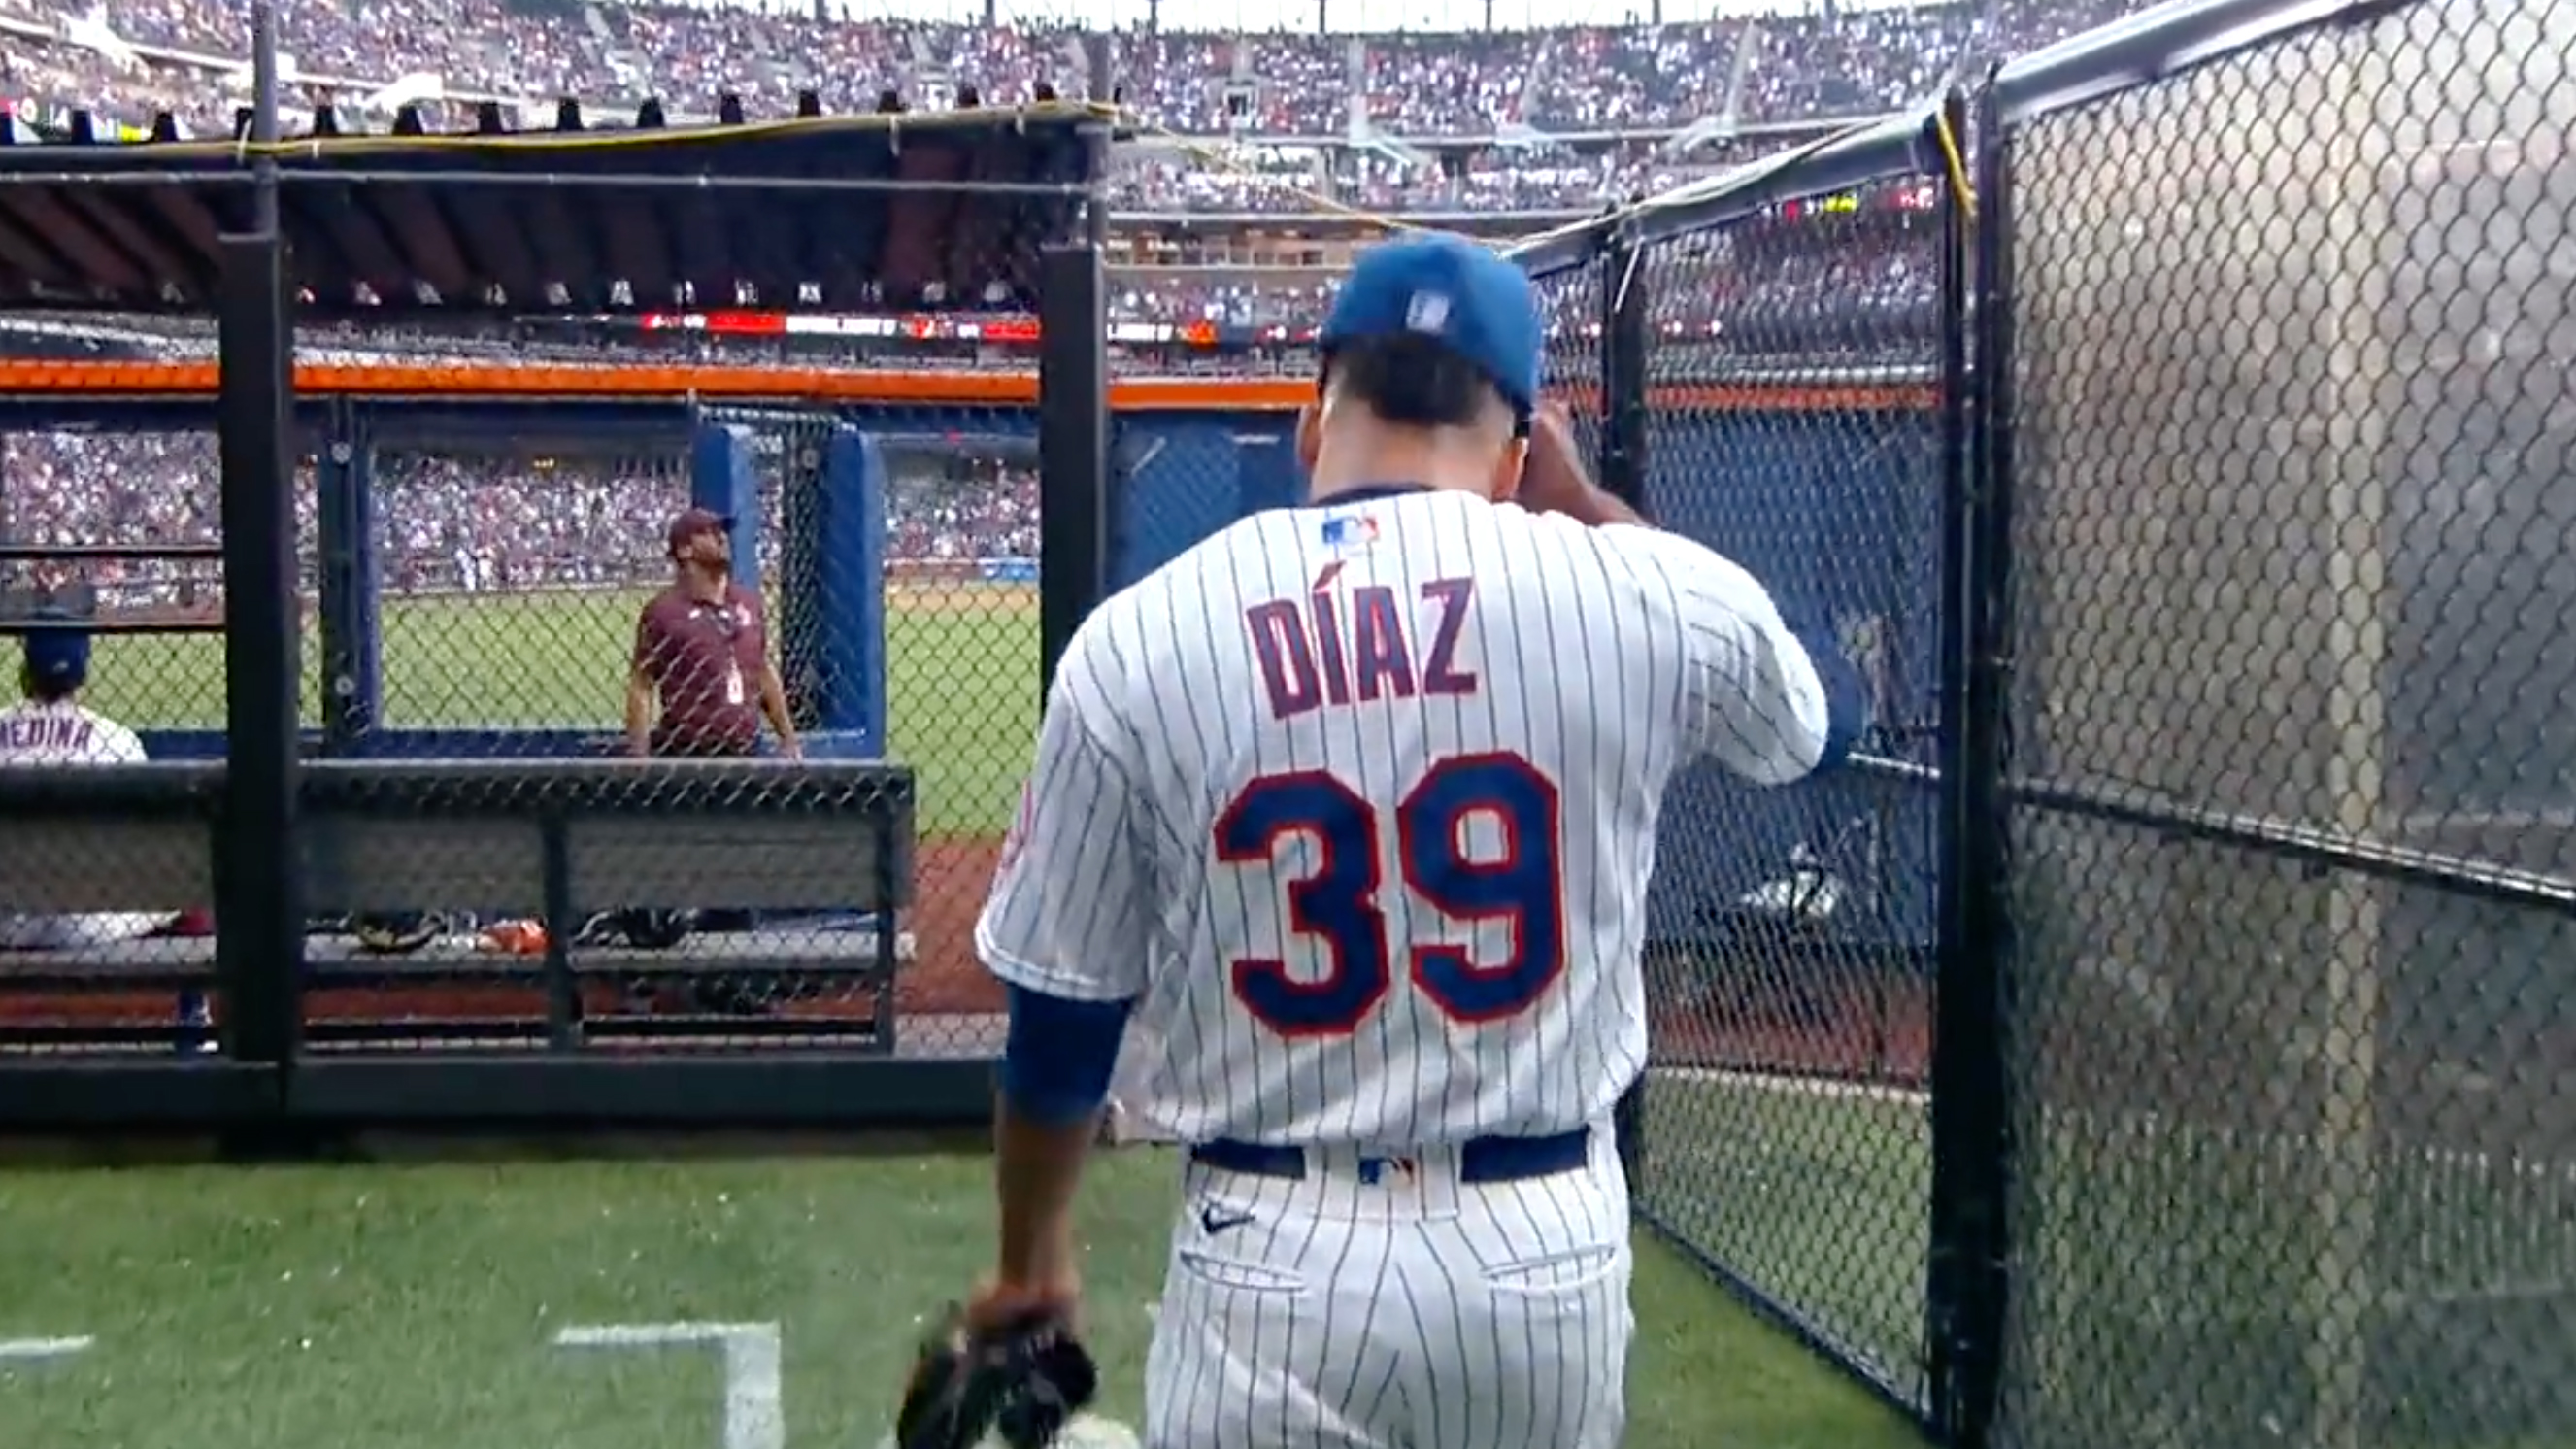 Video of Mets closer Edwin Diaz entrance goes viral - Sports Illustrated